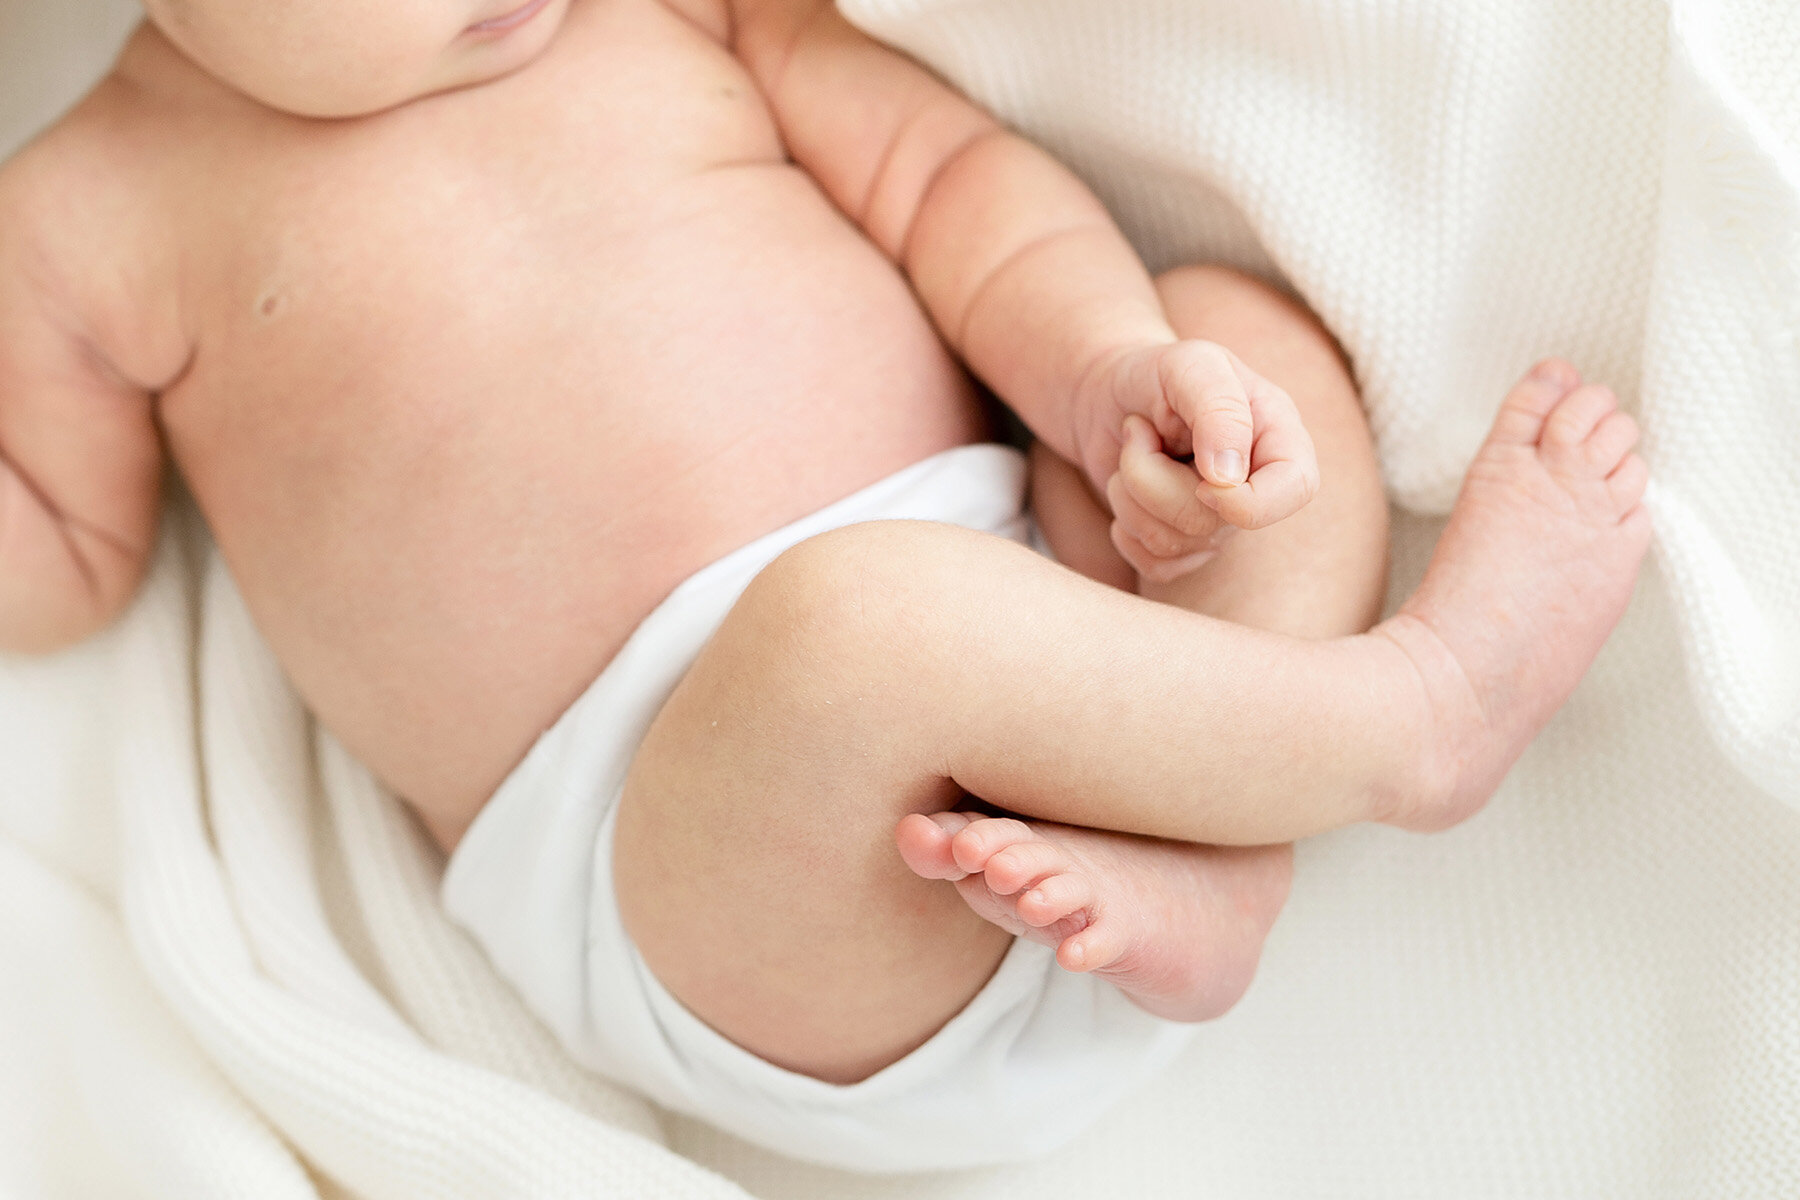 Detail photo of sleeping baby curled up to show hands and feet.